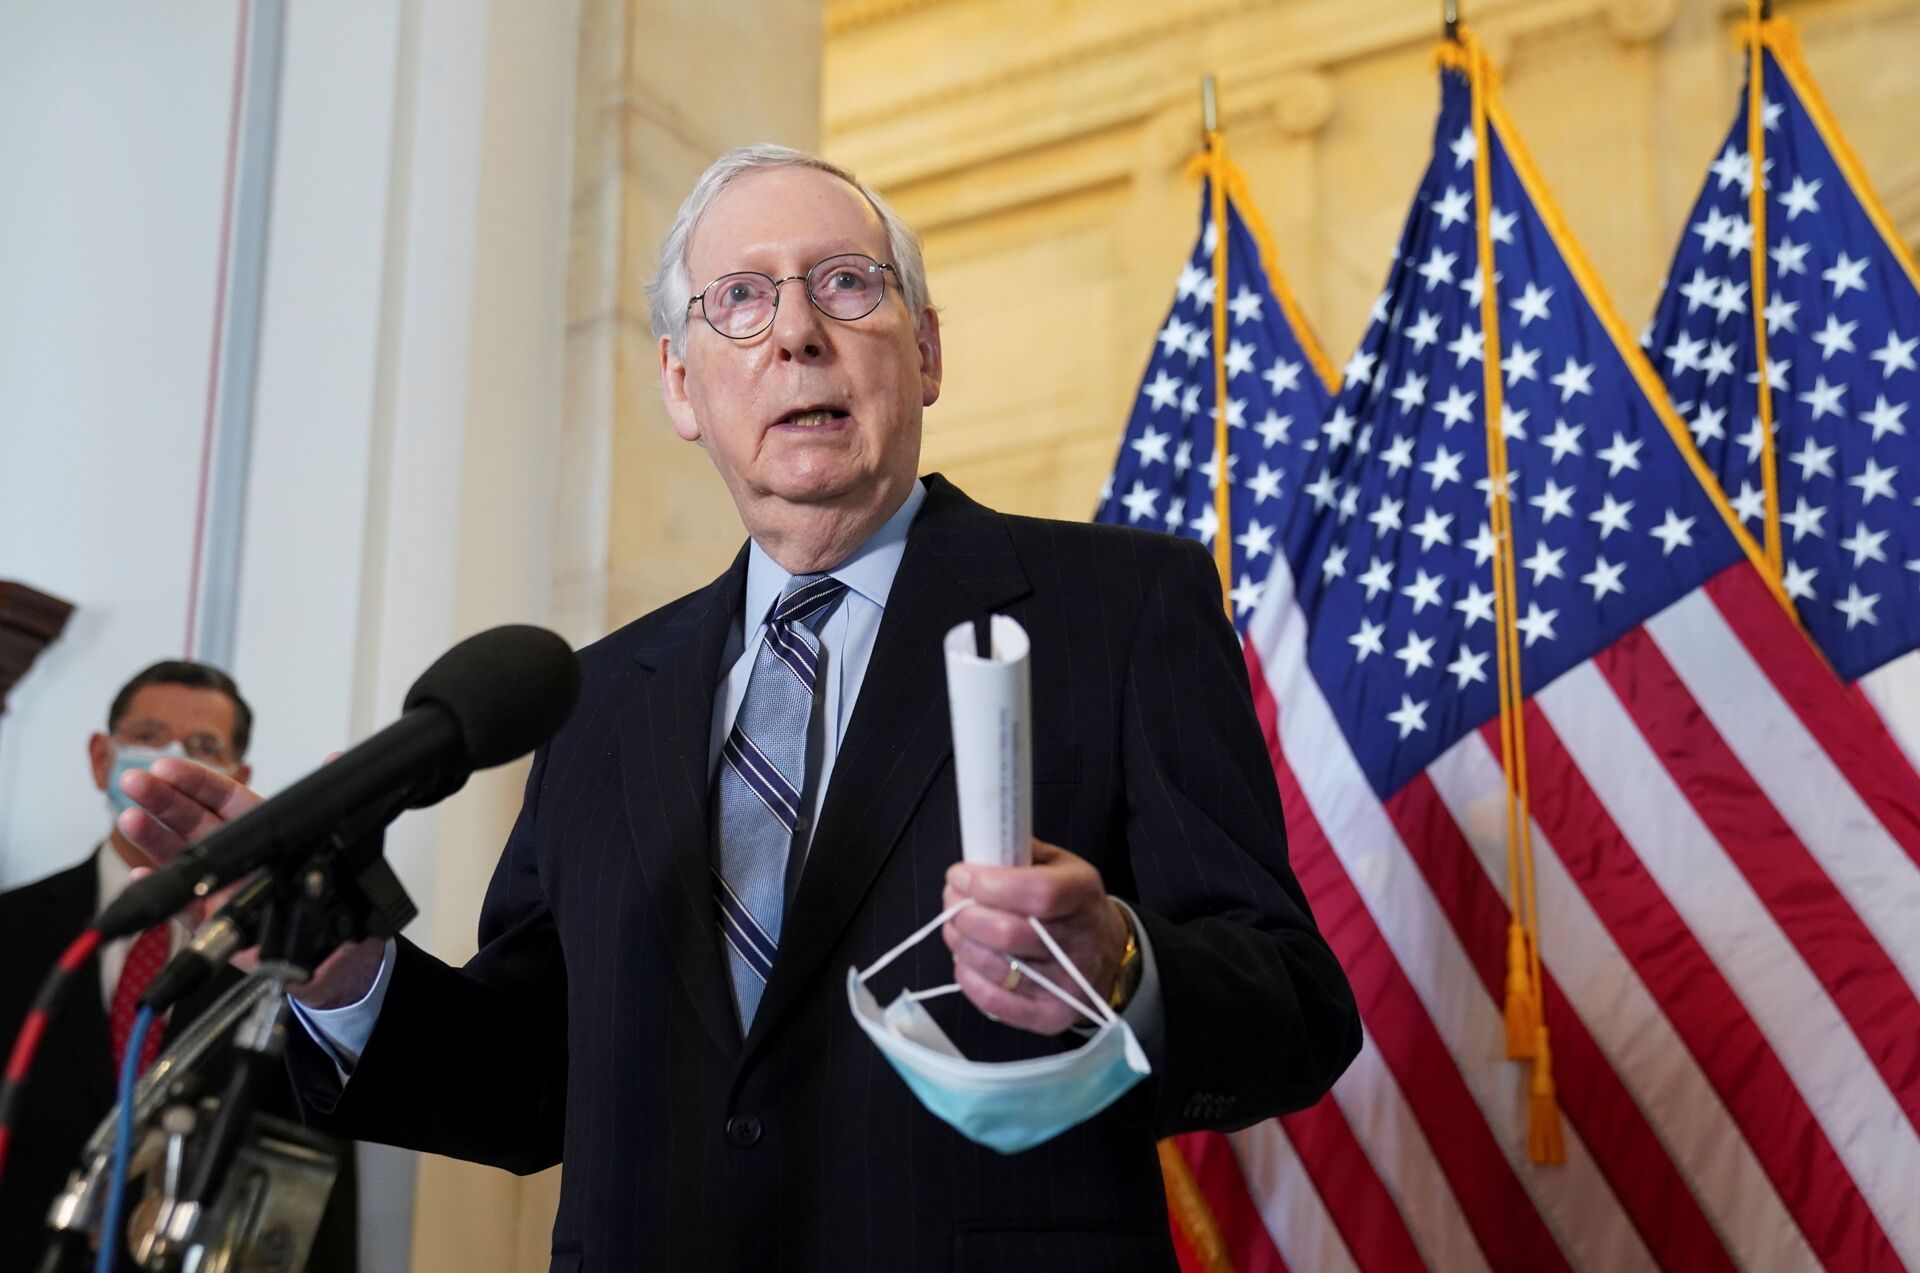 Senate Minority Leader Mitch McConnell speaks to reporters after the Senate Republican lunch on Capitol Hill in Washington, U.S., March 23, 2021 - Sputnik International, 1920, 20.09.2021